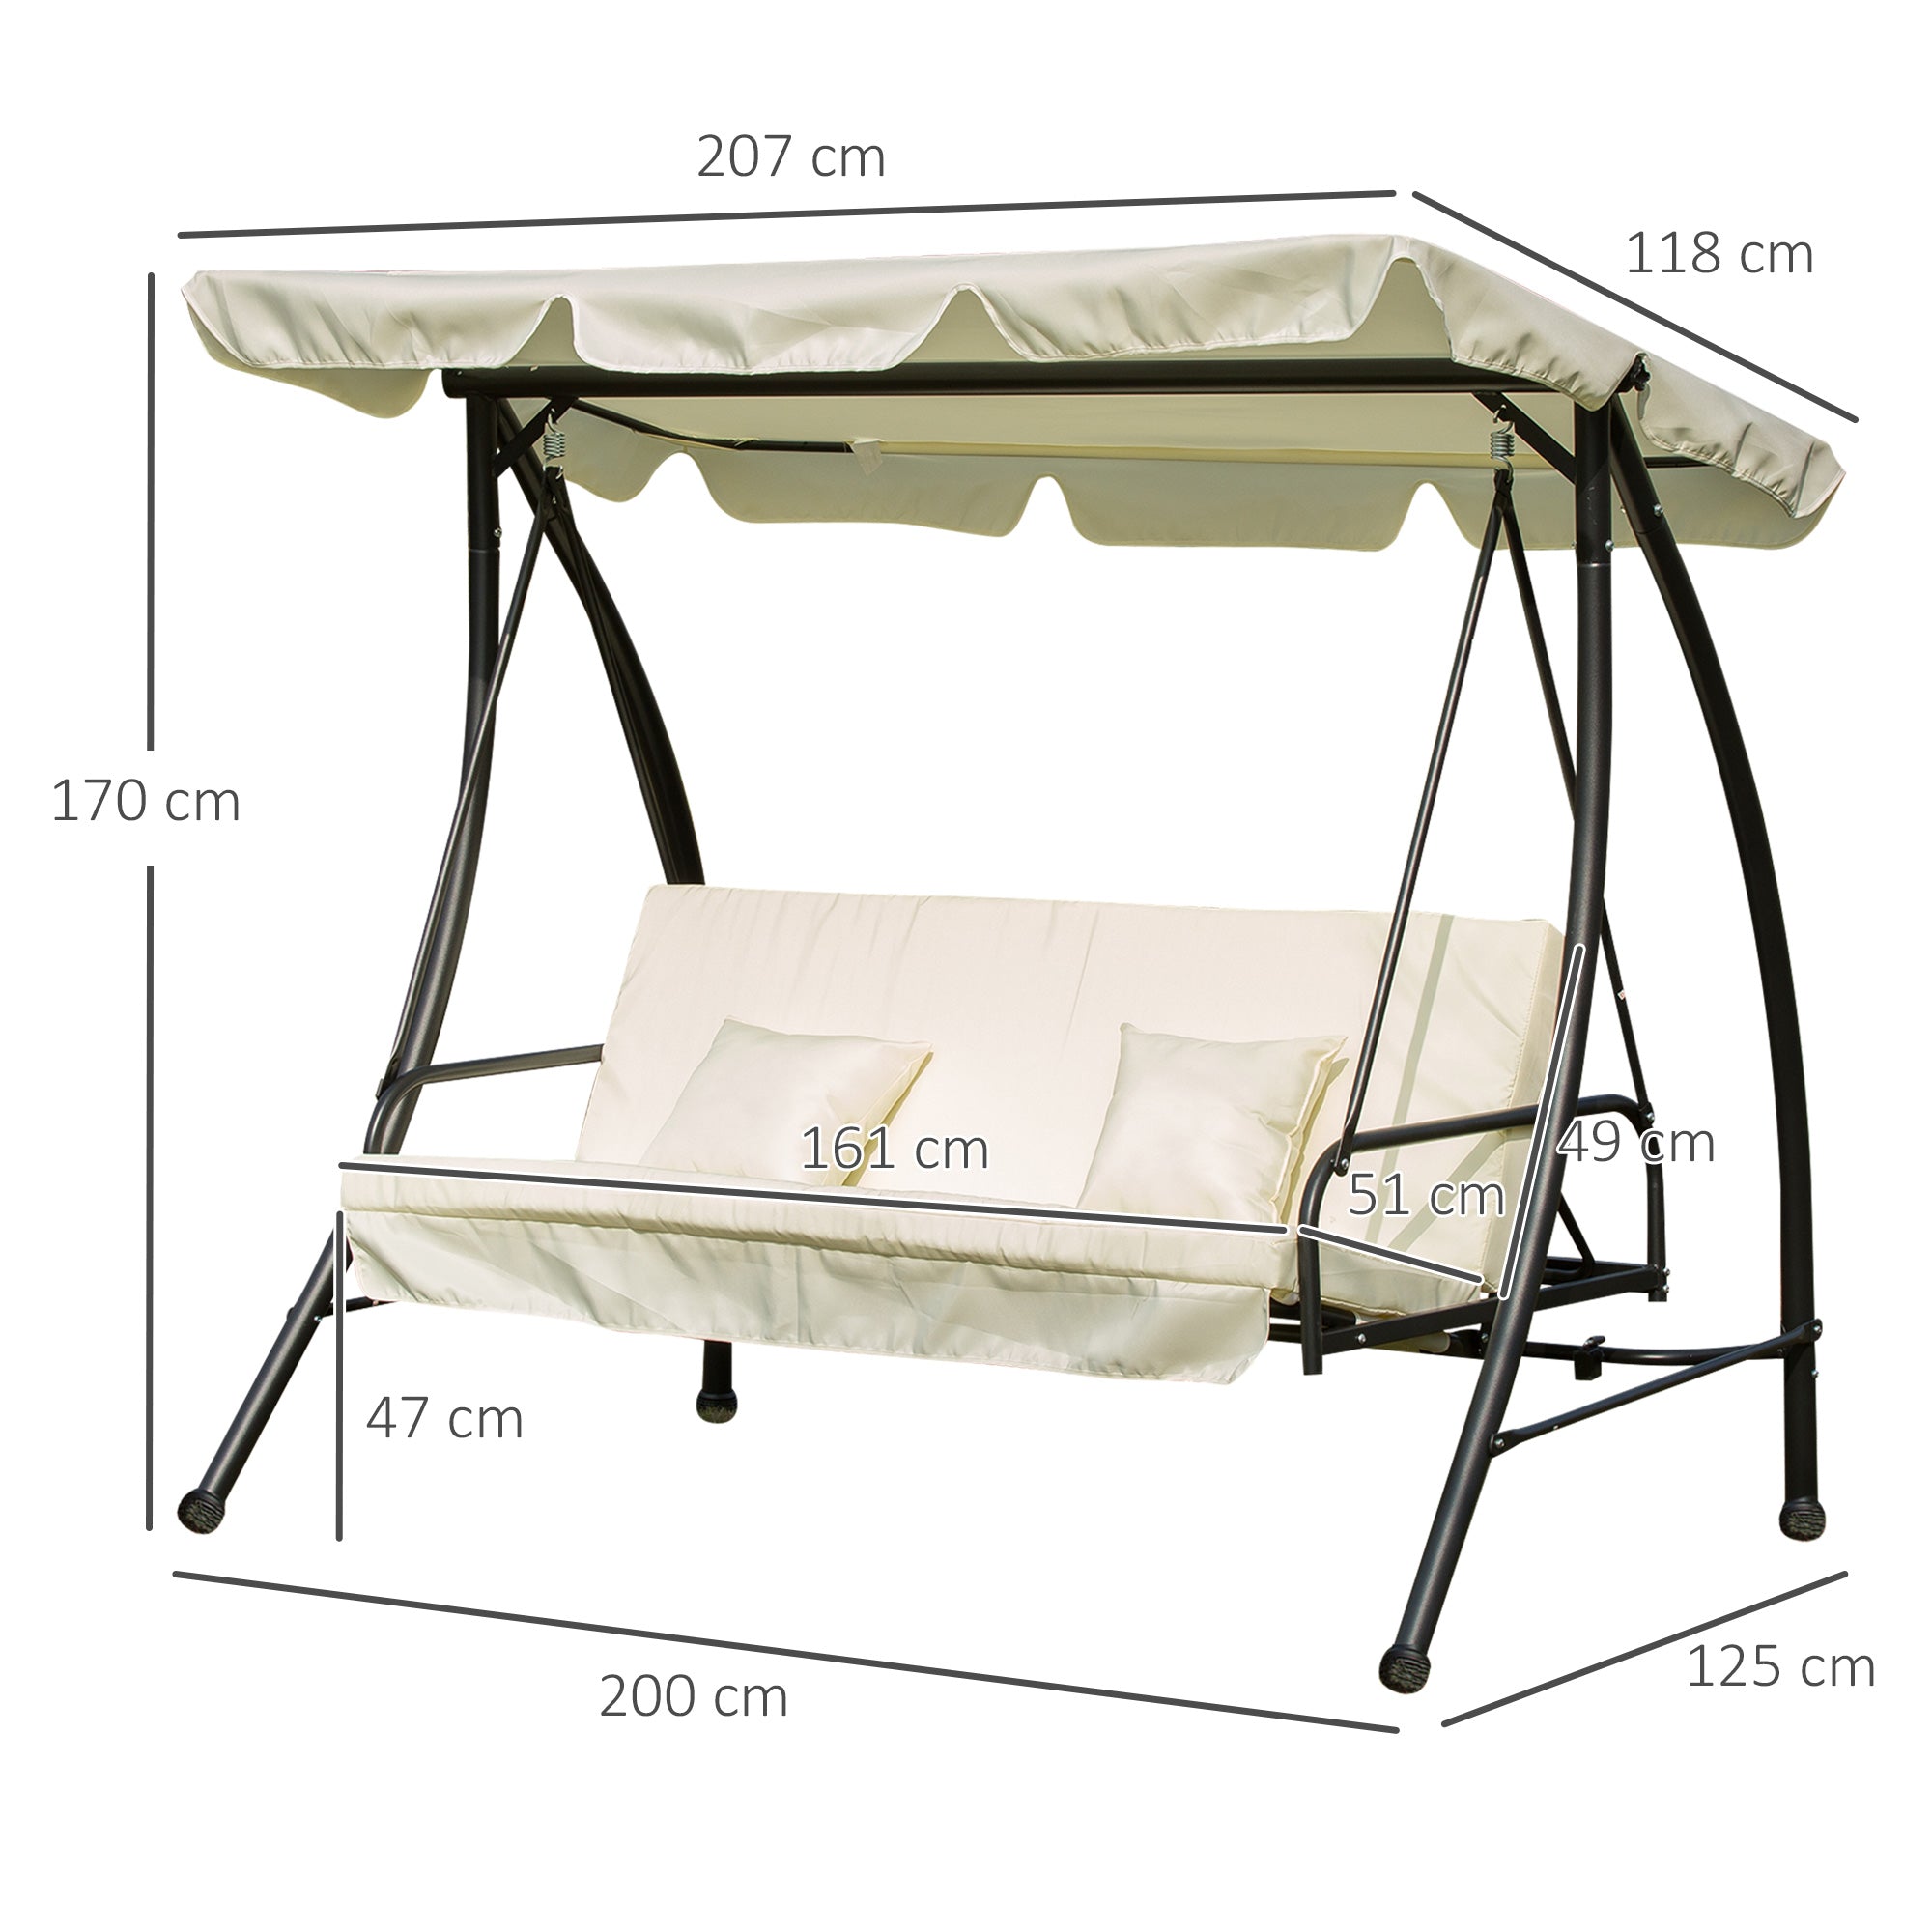 Outsunny 3 Seater Swing Chair 2-in-1 Hammock Bed Patio Garden Chair with Adjustable Canopy and Cushions, Cream White - Inspirely